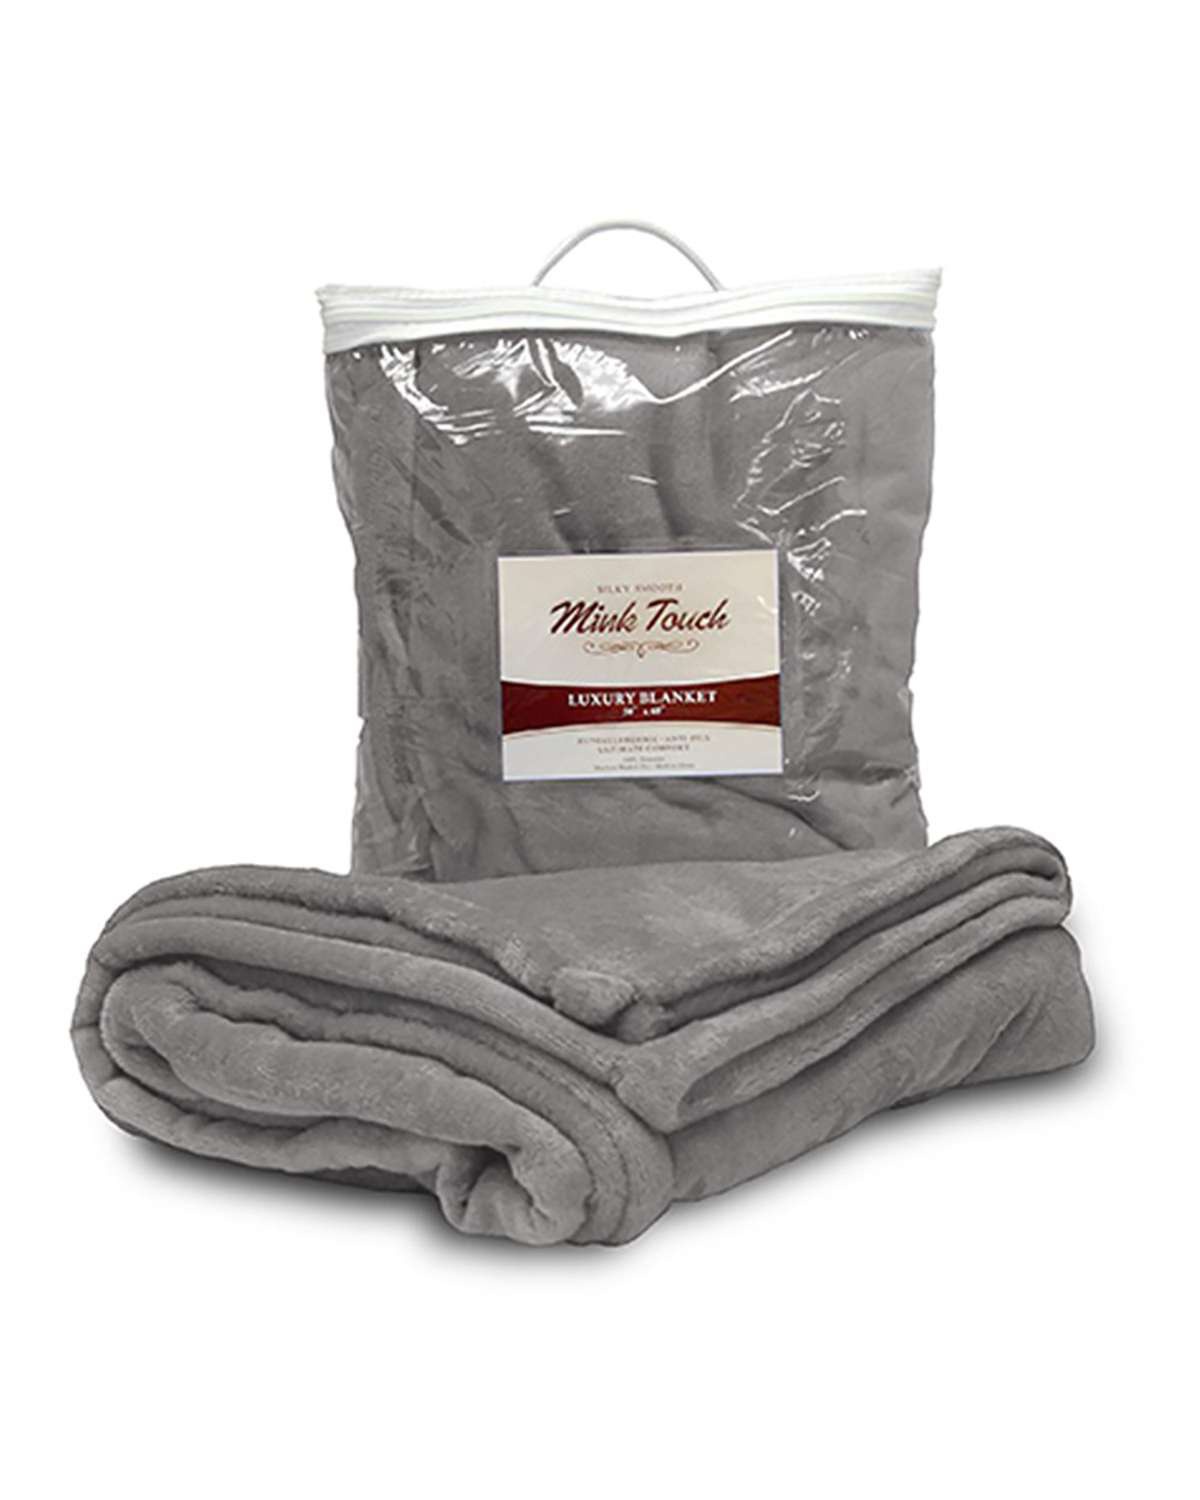 'Liberty Bags 8721 Mink Touch Luxury Blanket'